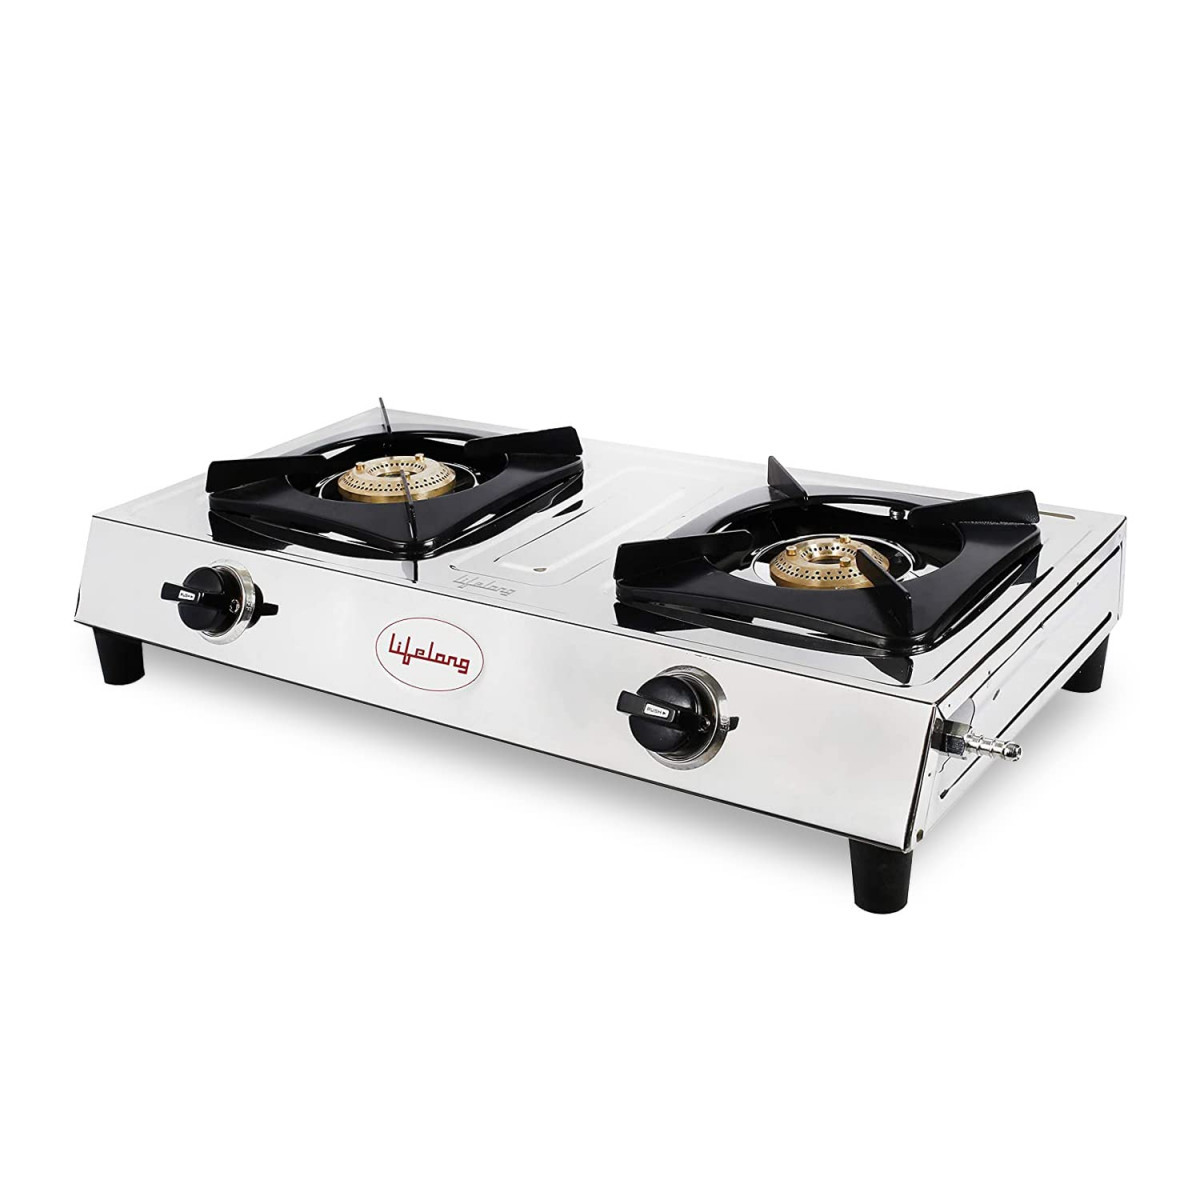 Lifelong 2 Burner Gas Stove Top for Kitchen - Manual Ignition Cooktop with Stainless Steel for Kitchen